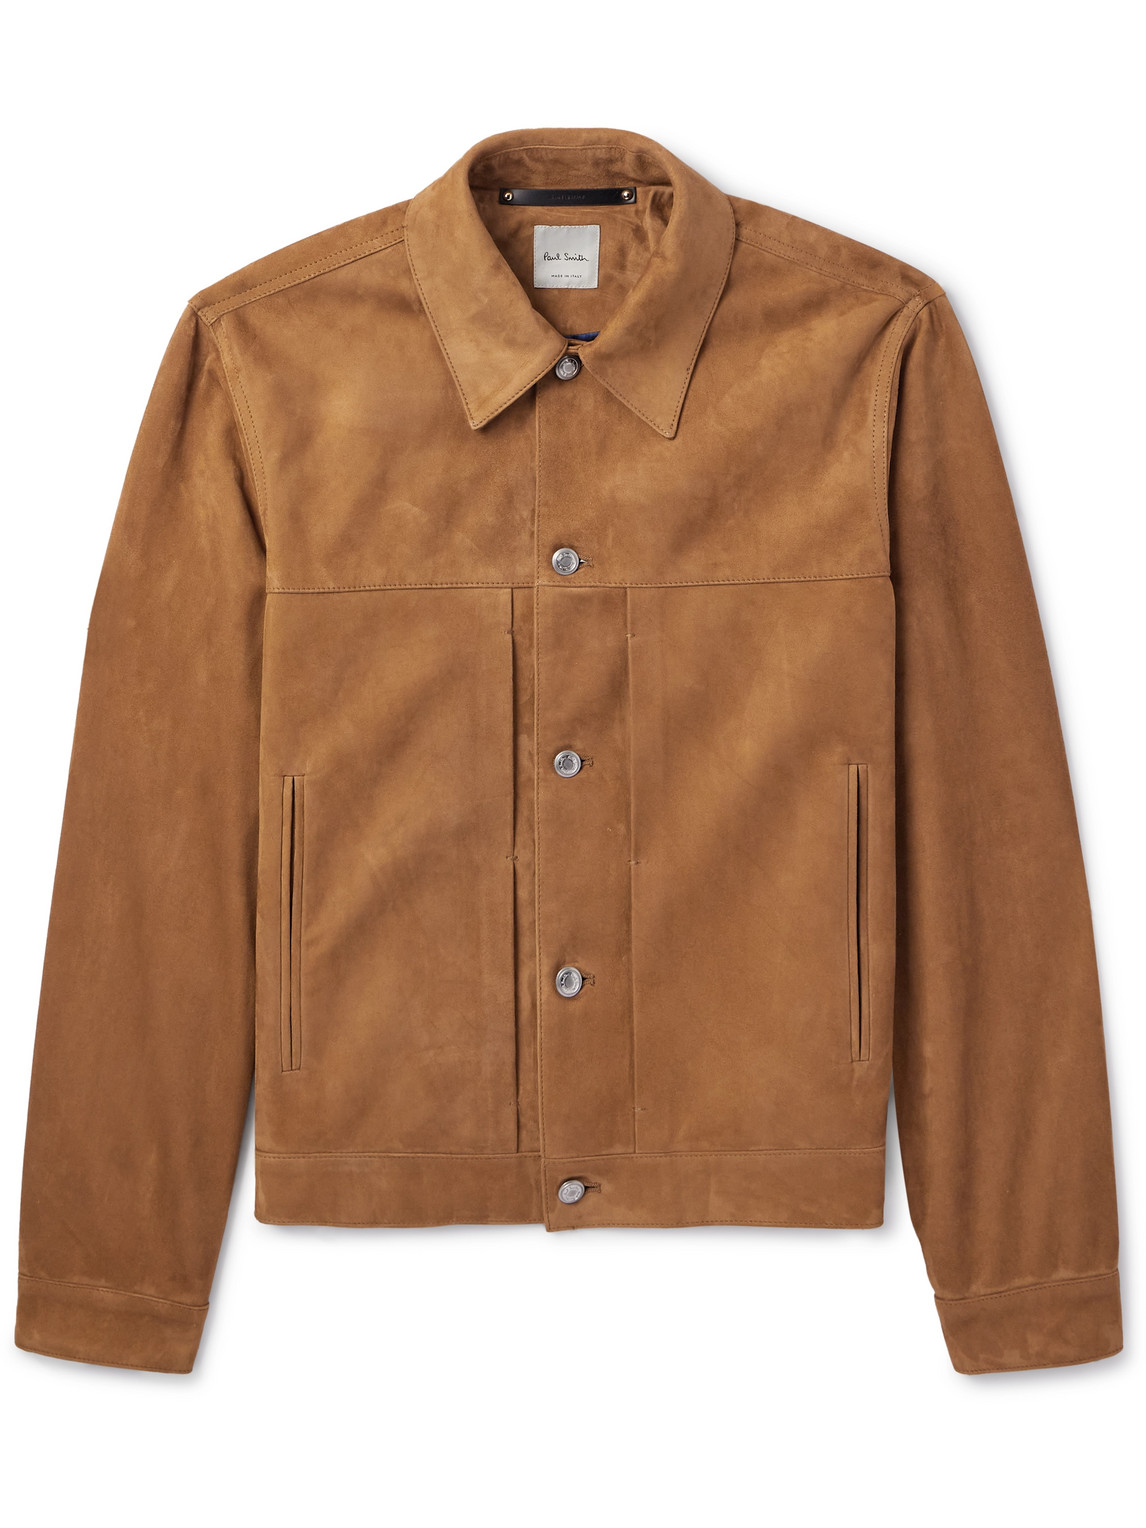 Paul Smith Suede Jacket In Brown